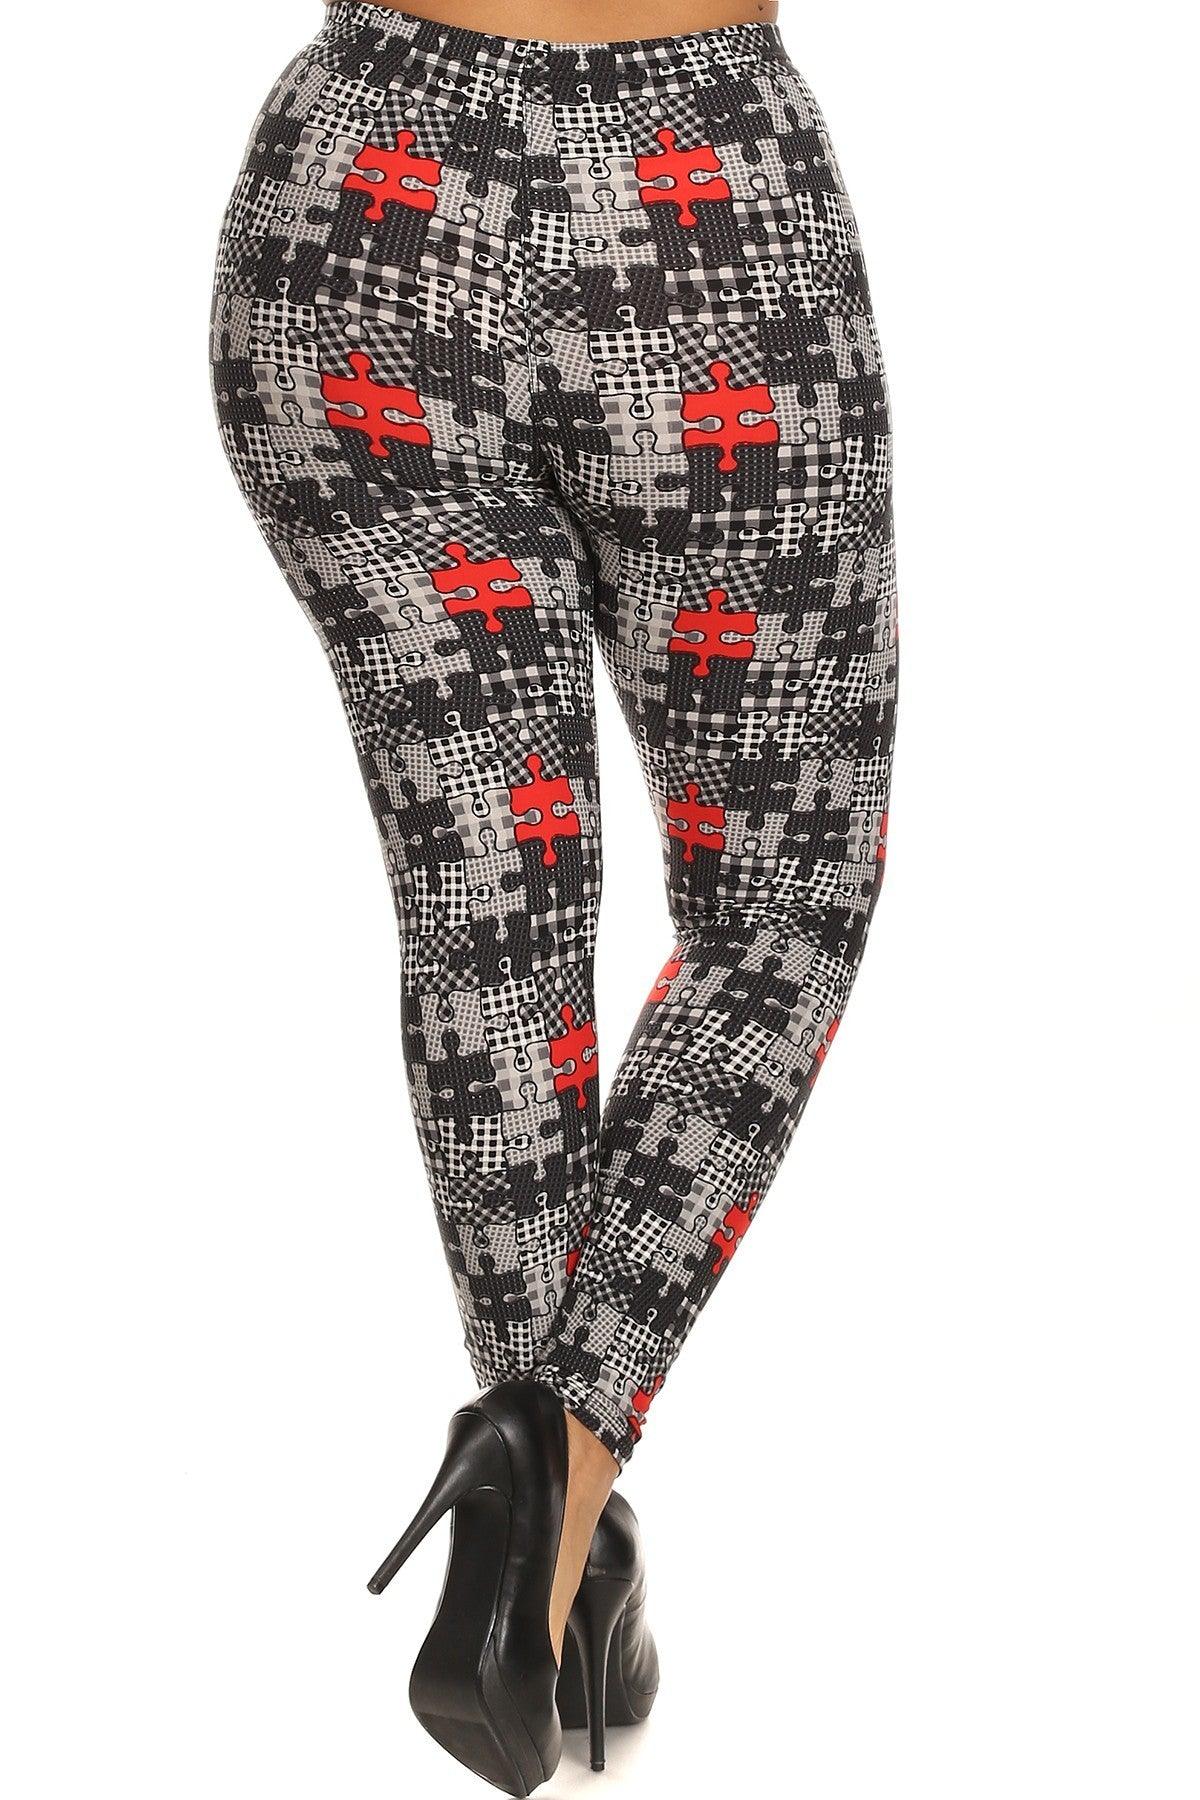 Plus Size Puzzle/plaid Print, Full Length Leggings In A Slim Fitting Style With A Banded High Waist - Kreative Passions